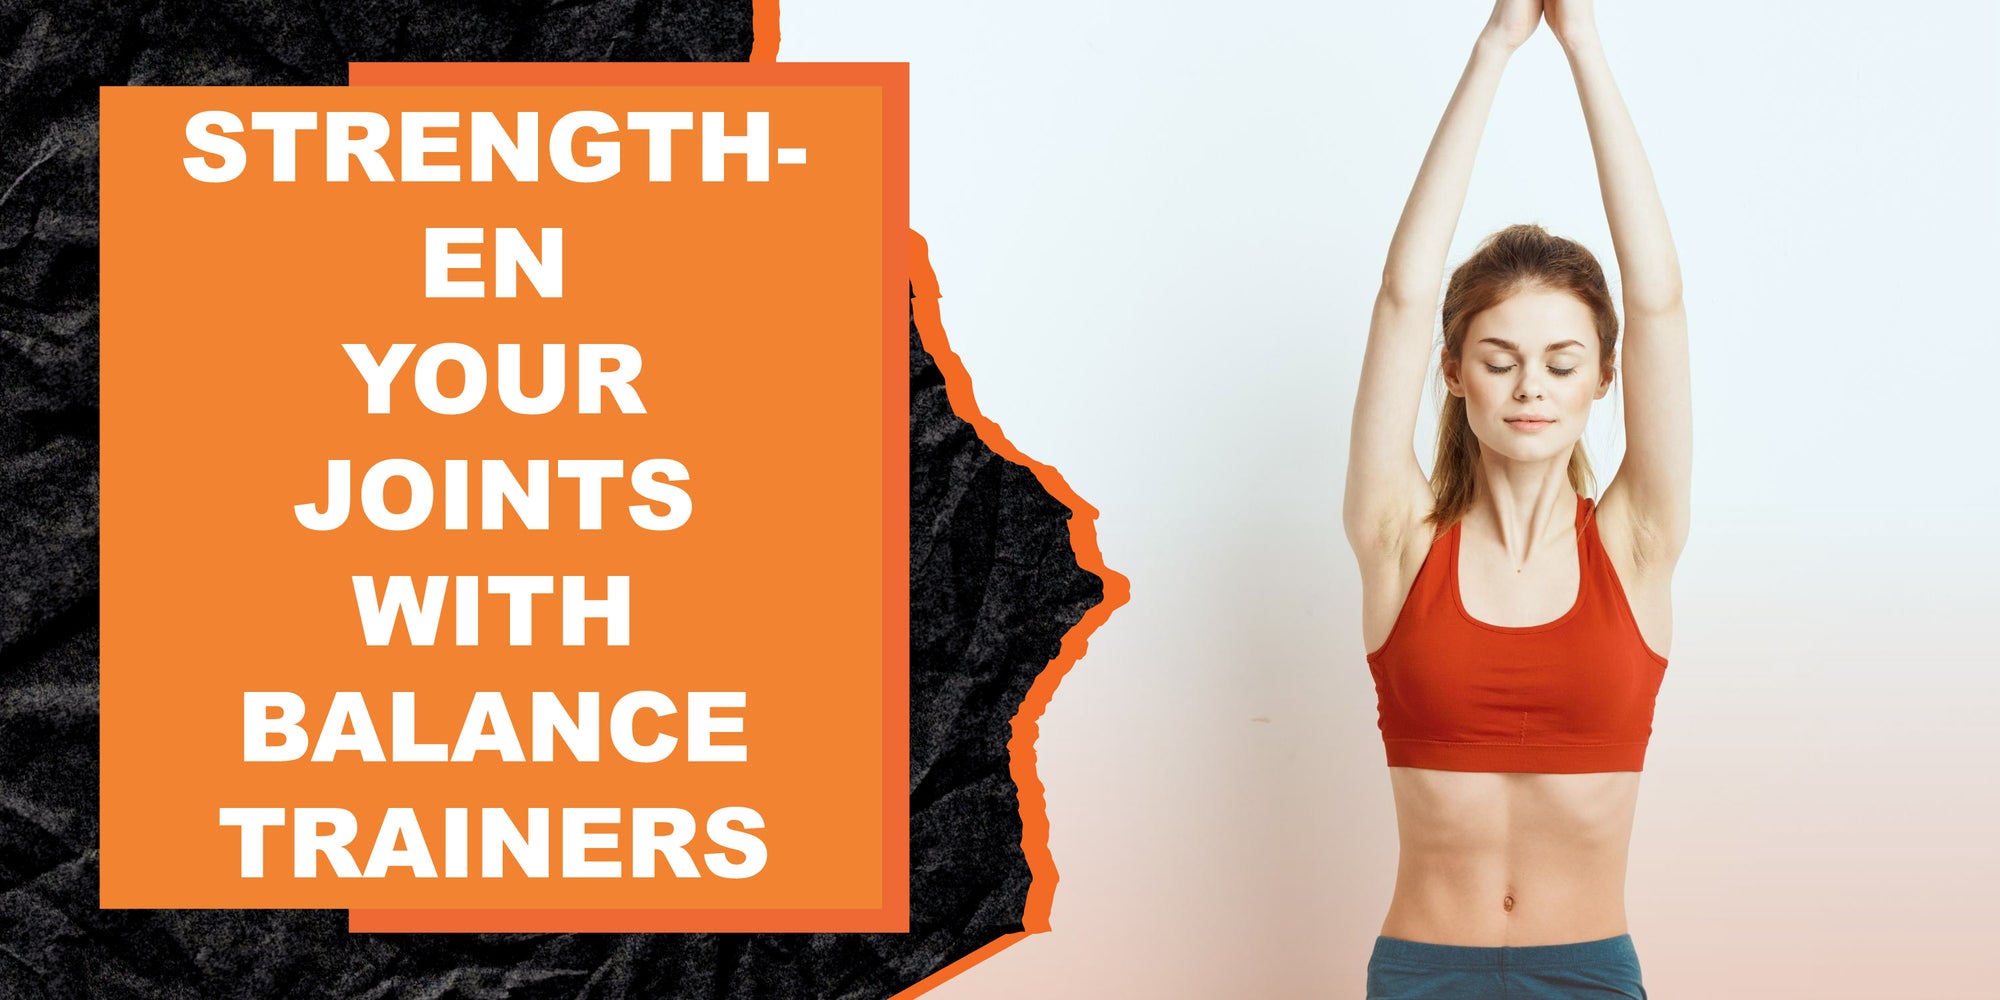 Strengthen Your Joints With Balance Trainers